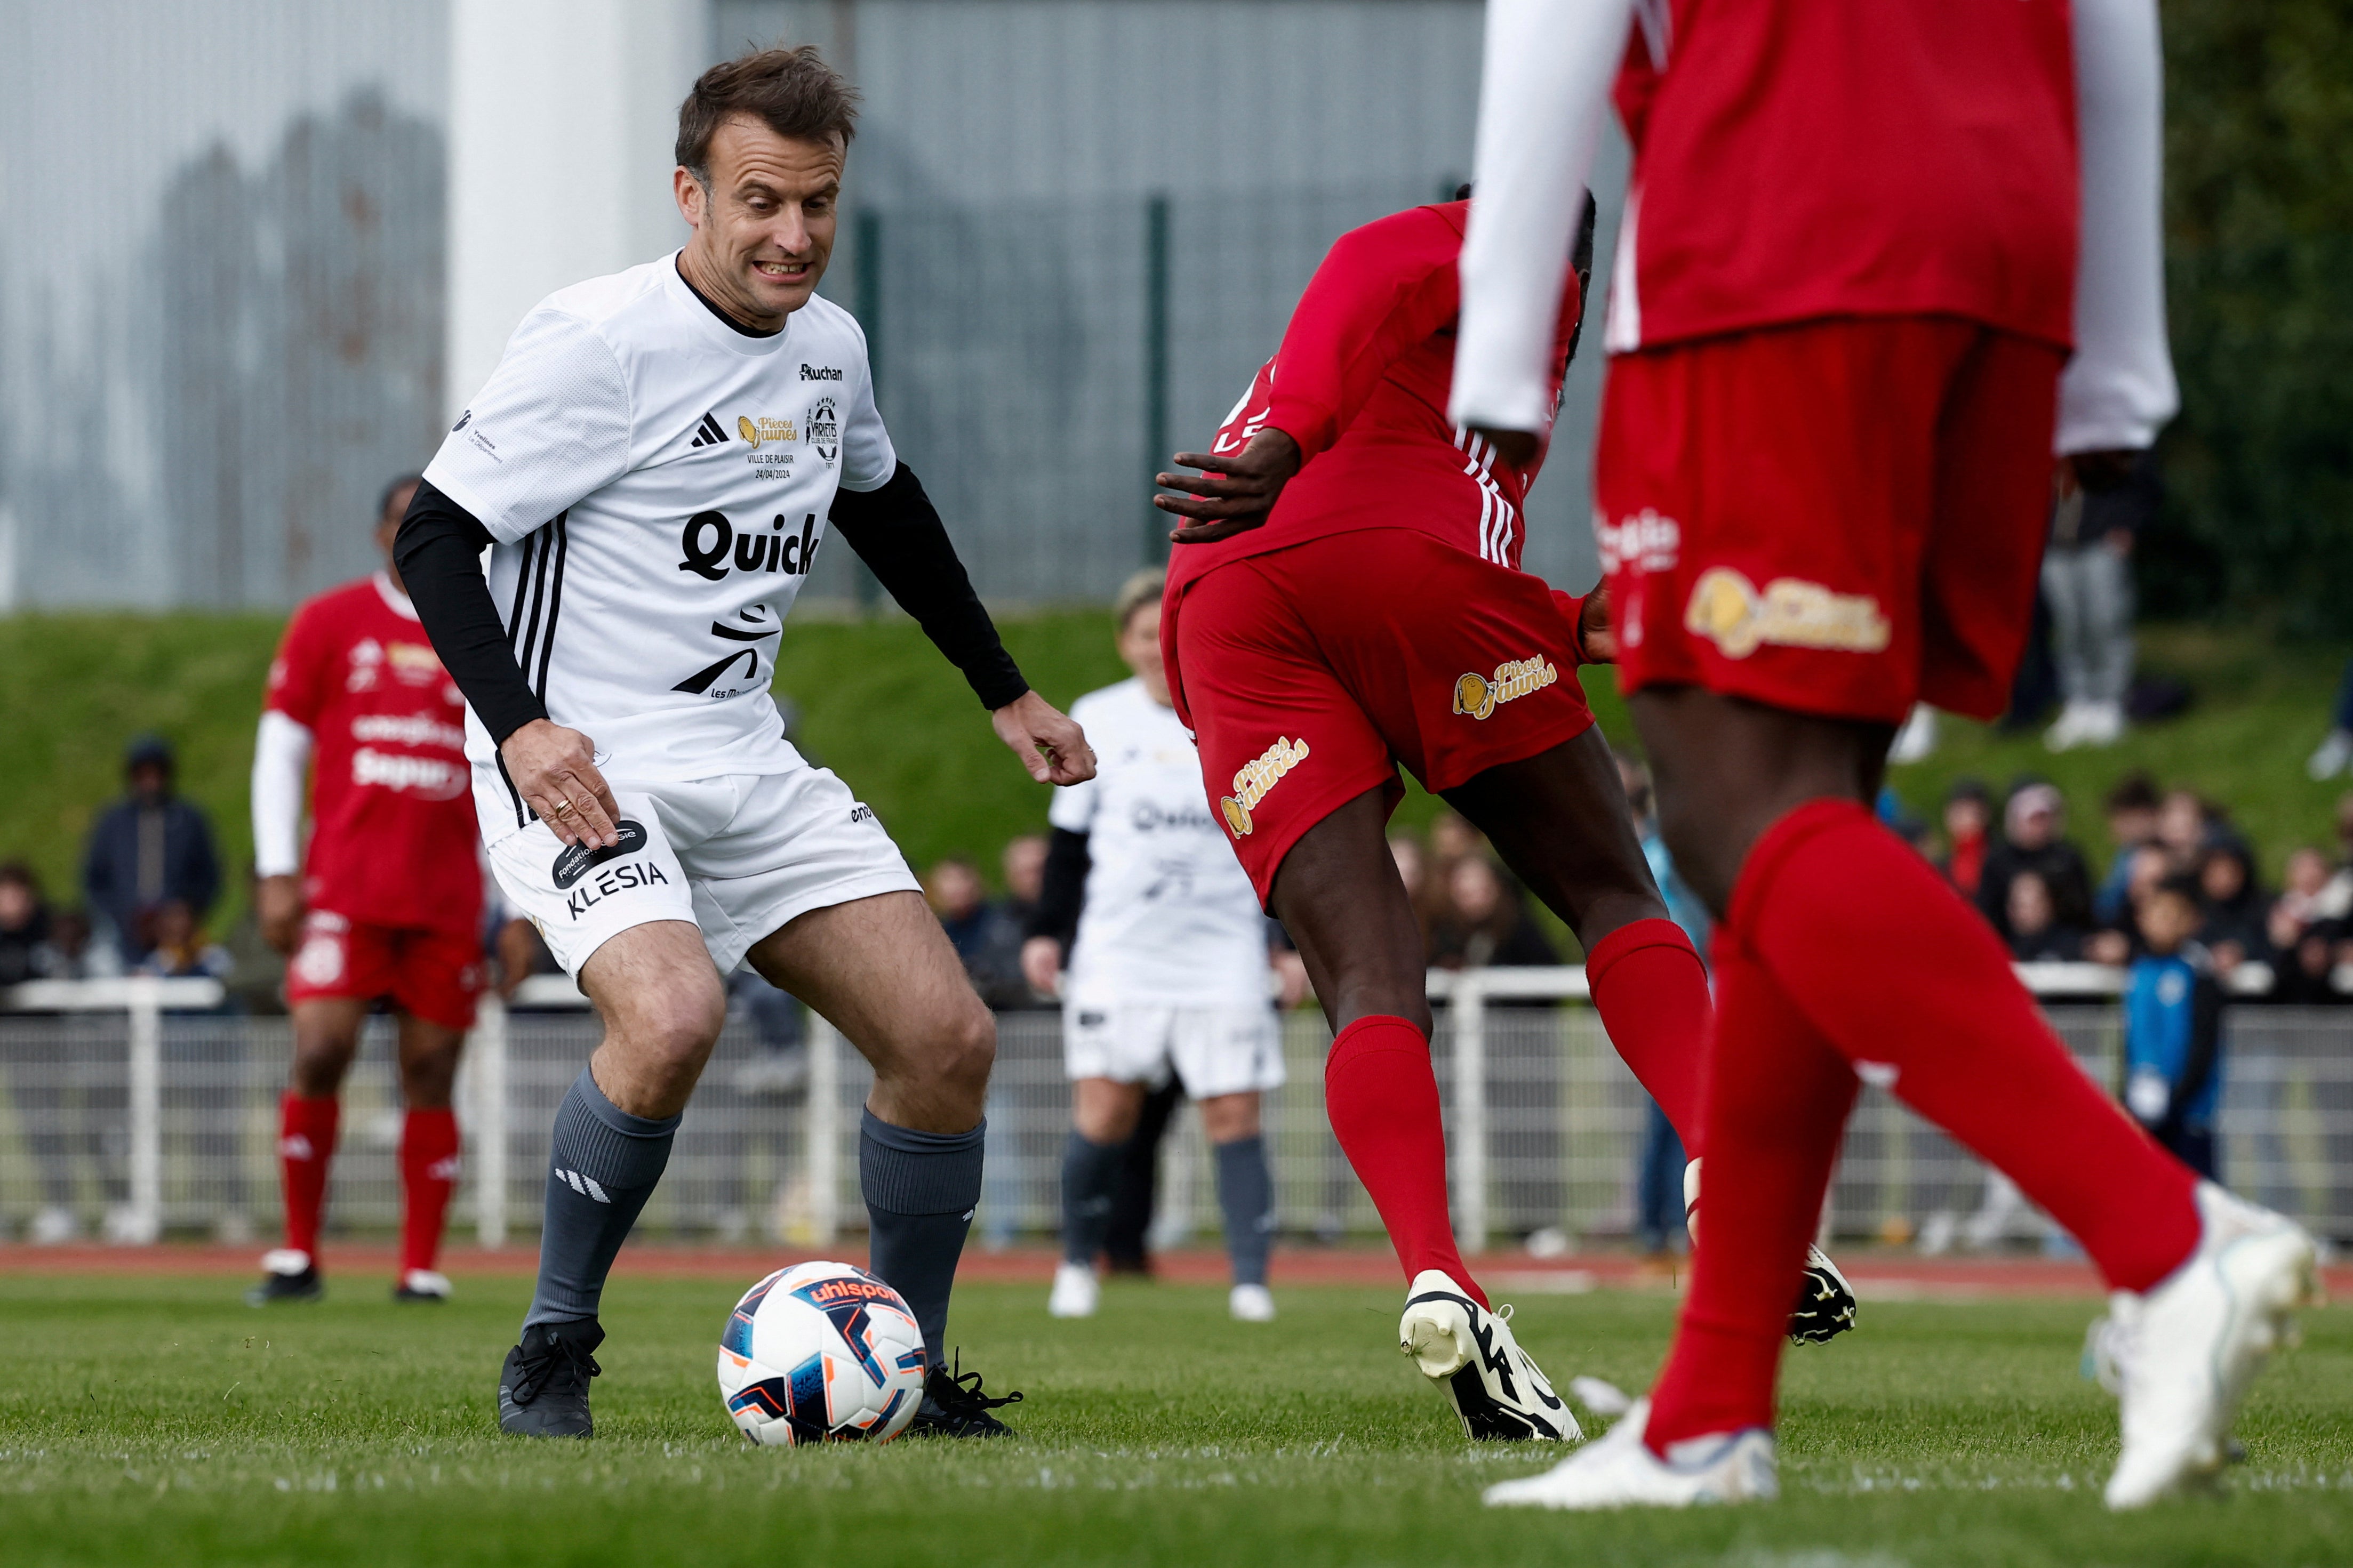 French President Emmanuel Macron controls the ball as he participates in the Varietes Club charity football match